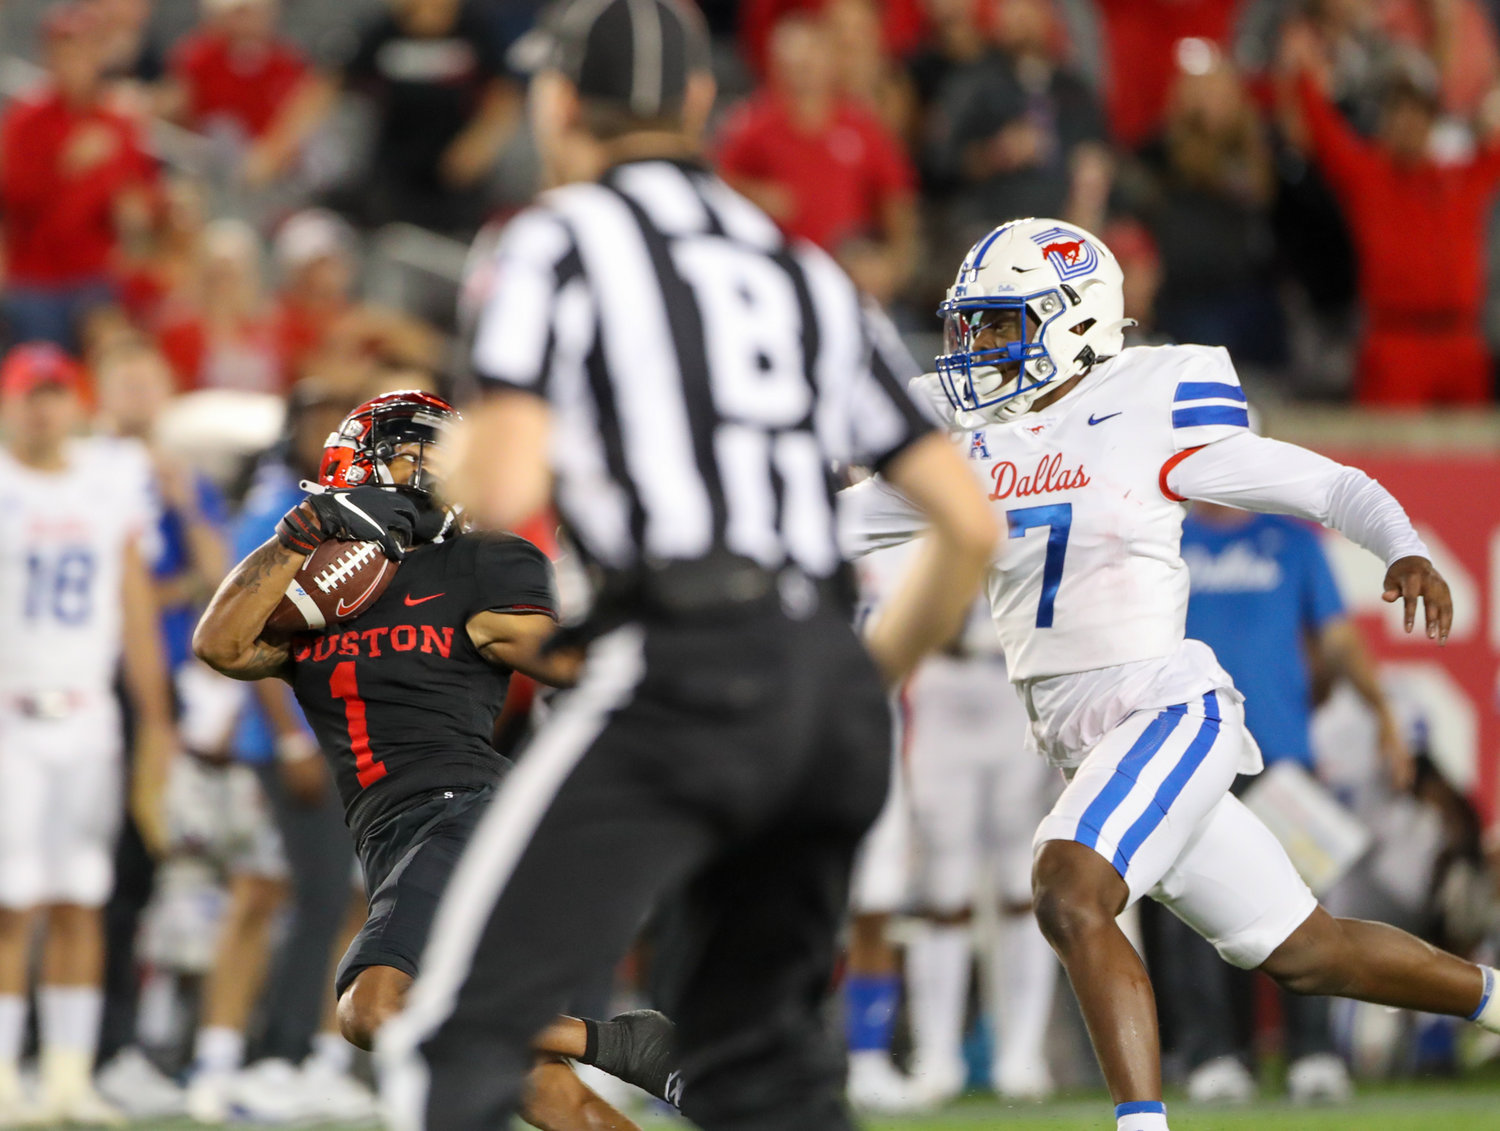 A game official gets in the way of a photographer’s shot of a reception by Houston Cougars wide receiver Nathaniel Dell (1)during an NCAA football game between Houston and SMU on October 30, 2021 in Houston, Texas.